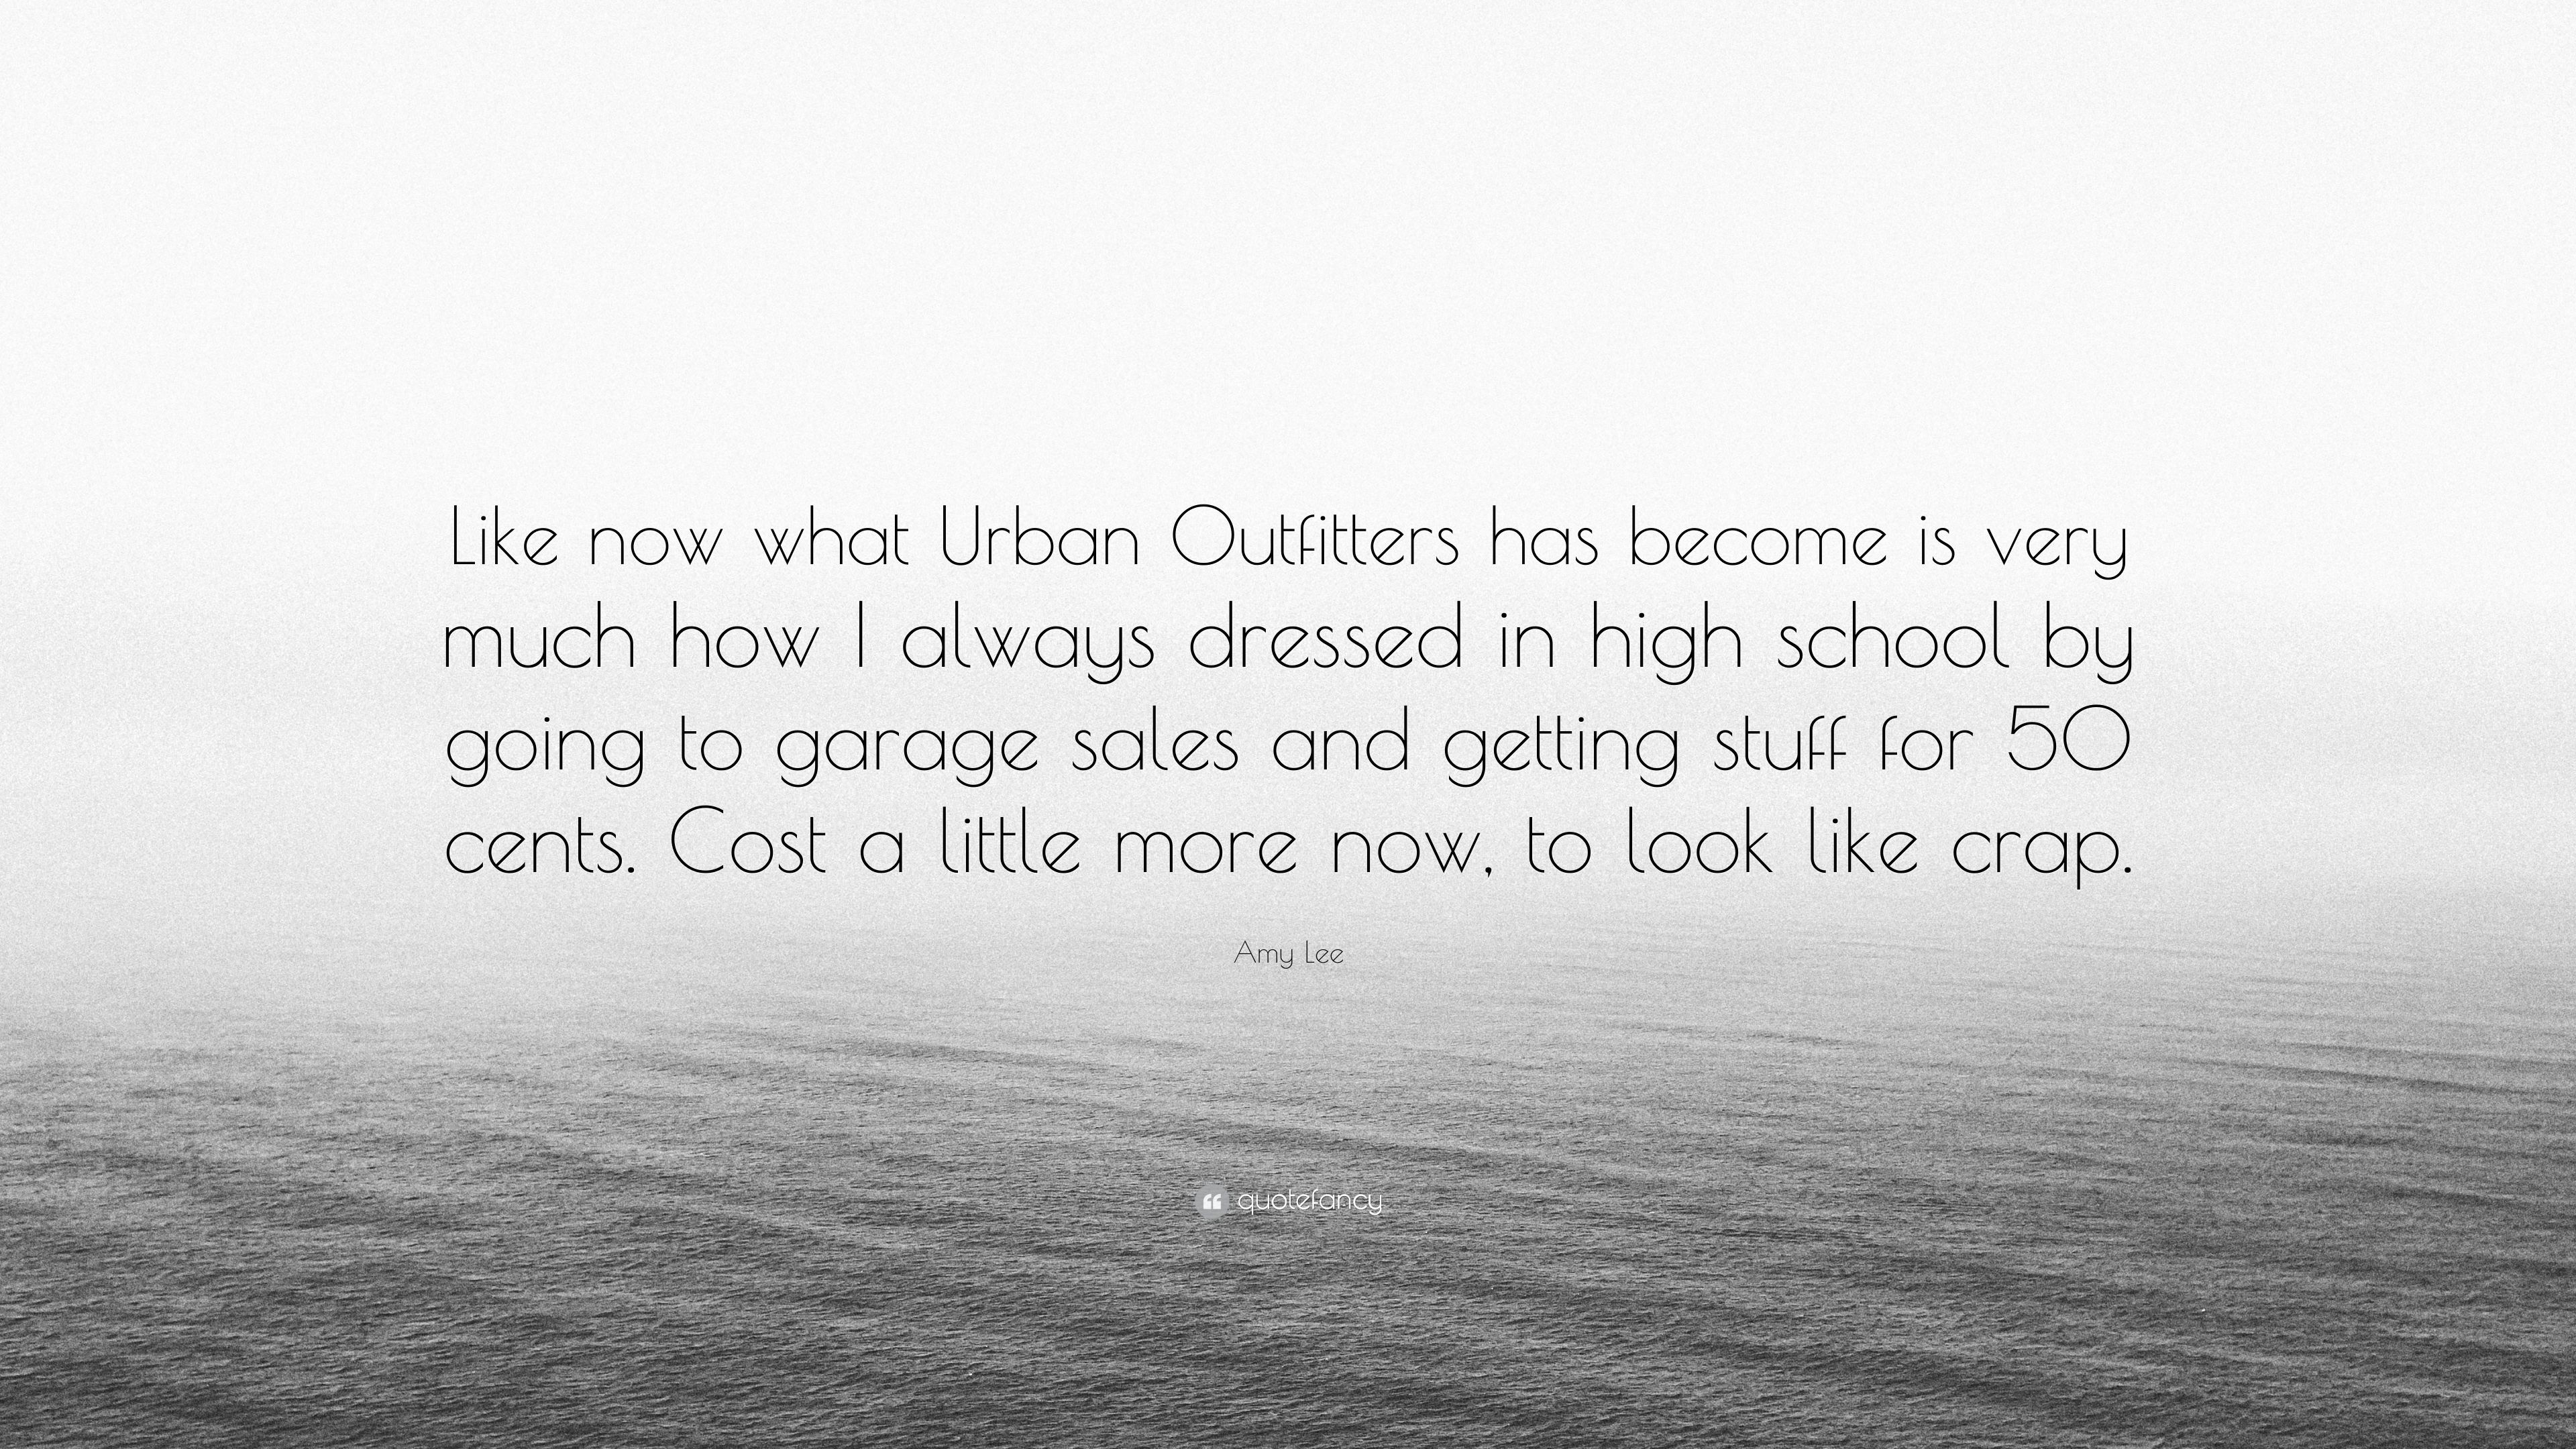 Amy Lee Quote: “Like now what Urban Outfitters has become is very